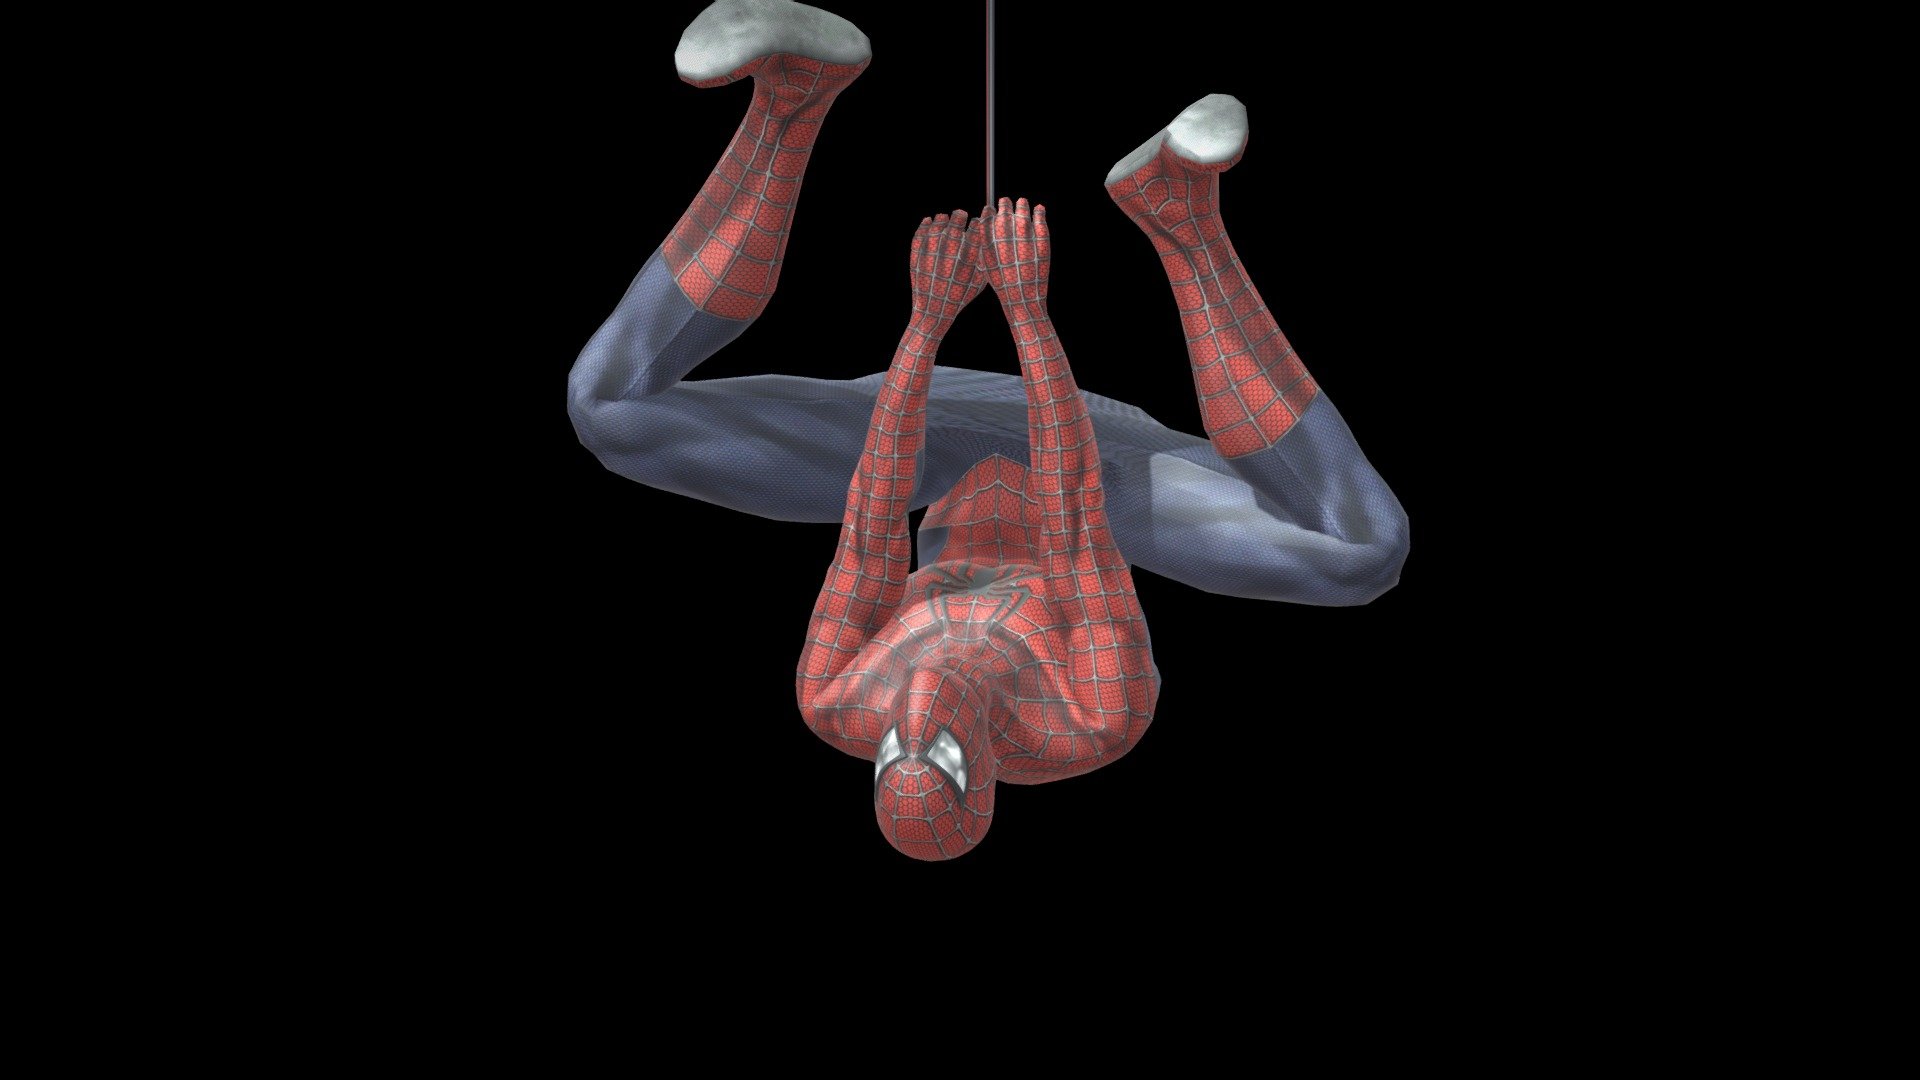 Rami Spider-Man Hanging Upside down from a web Not my model so no download
Link:https://sketchfab.com/3d-models/spider-man-sam-raimi-e4b9e1c03b85475bb39e0c9516c1402e - Spider-Man Upside down Model - 3D model by AwesomeBlox044 3d model